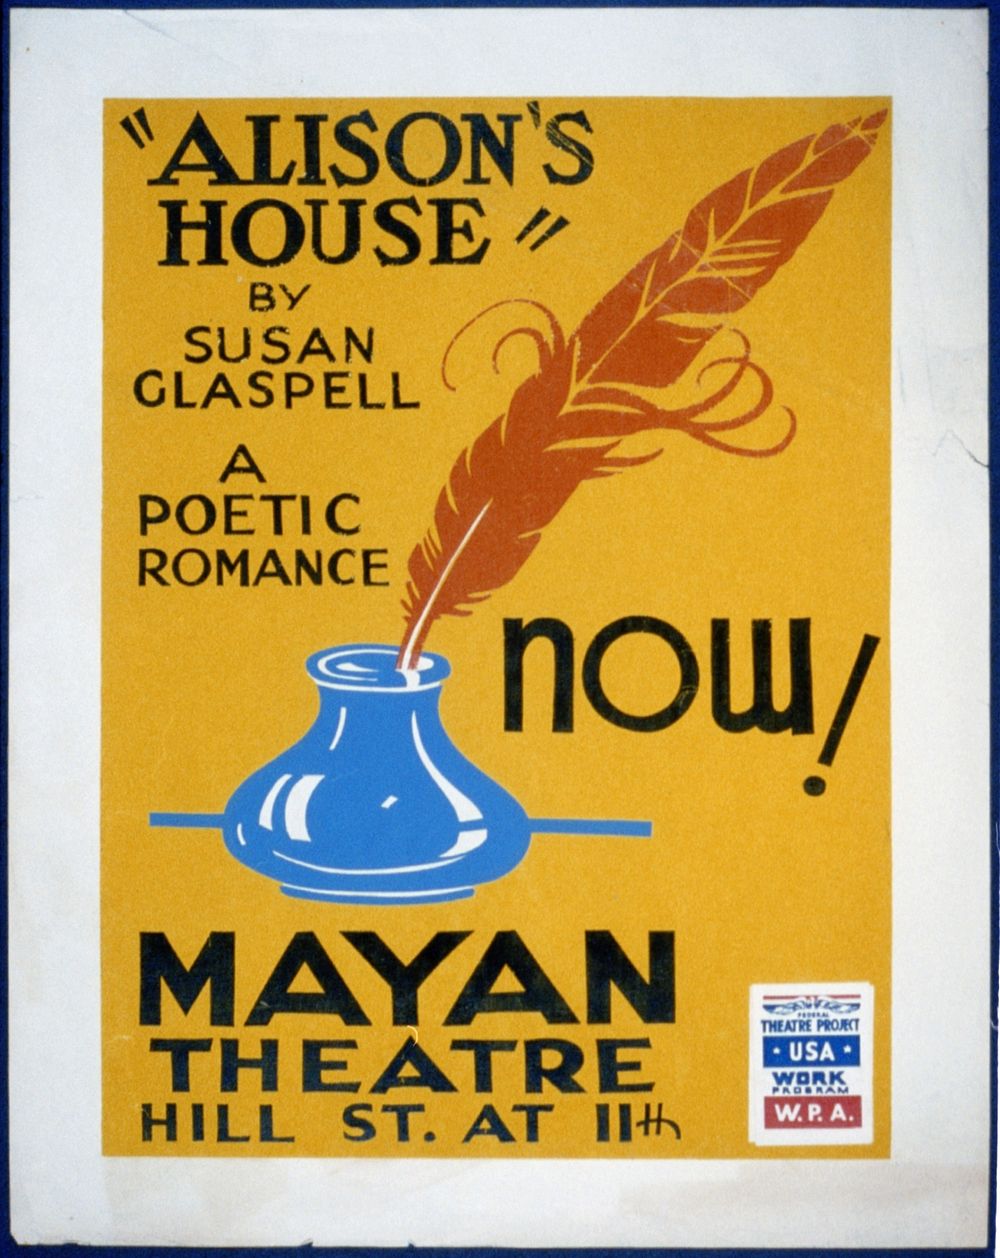 "Alison's house" by Susan Glaspell a poetic romance.